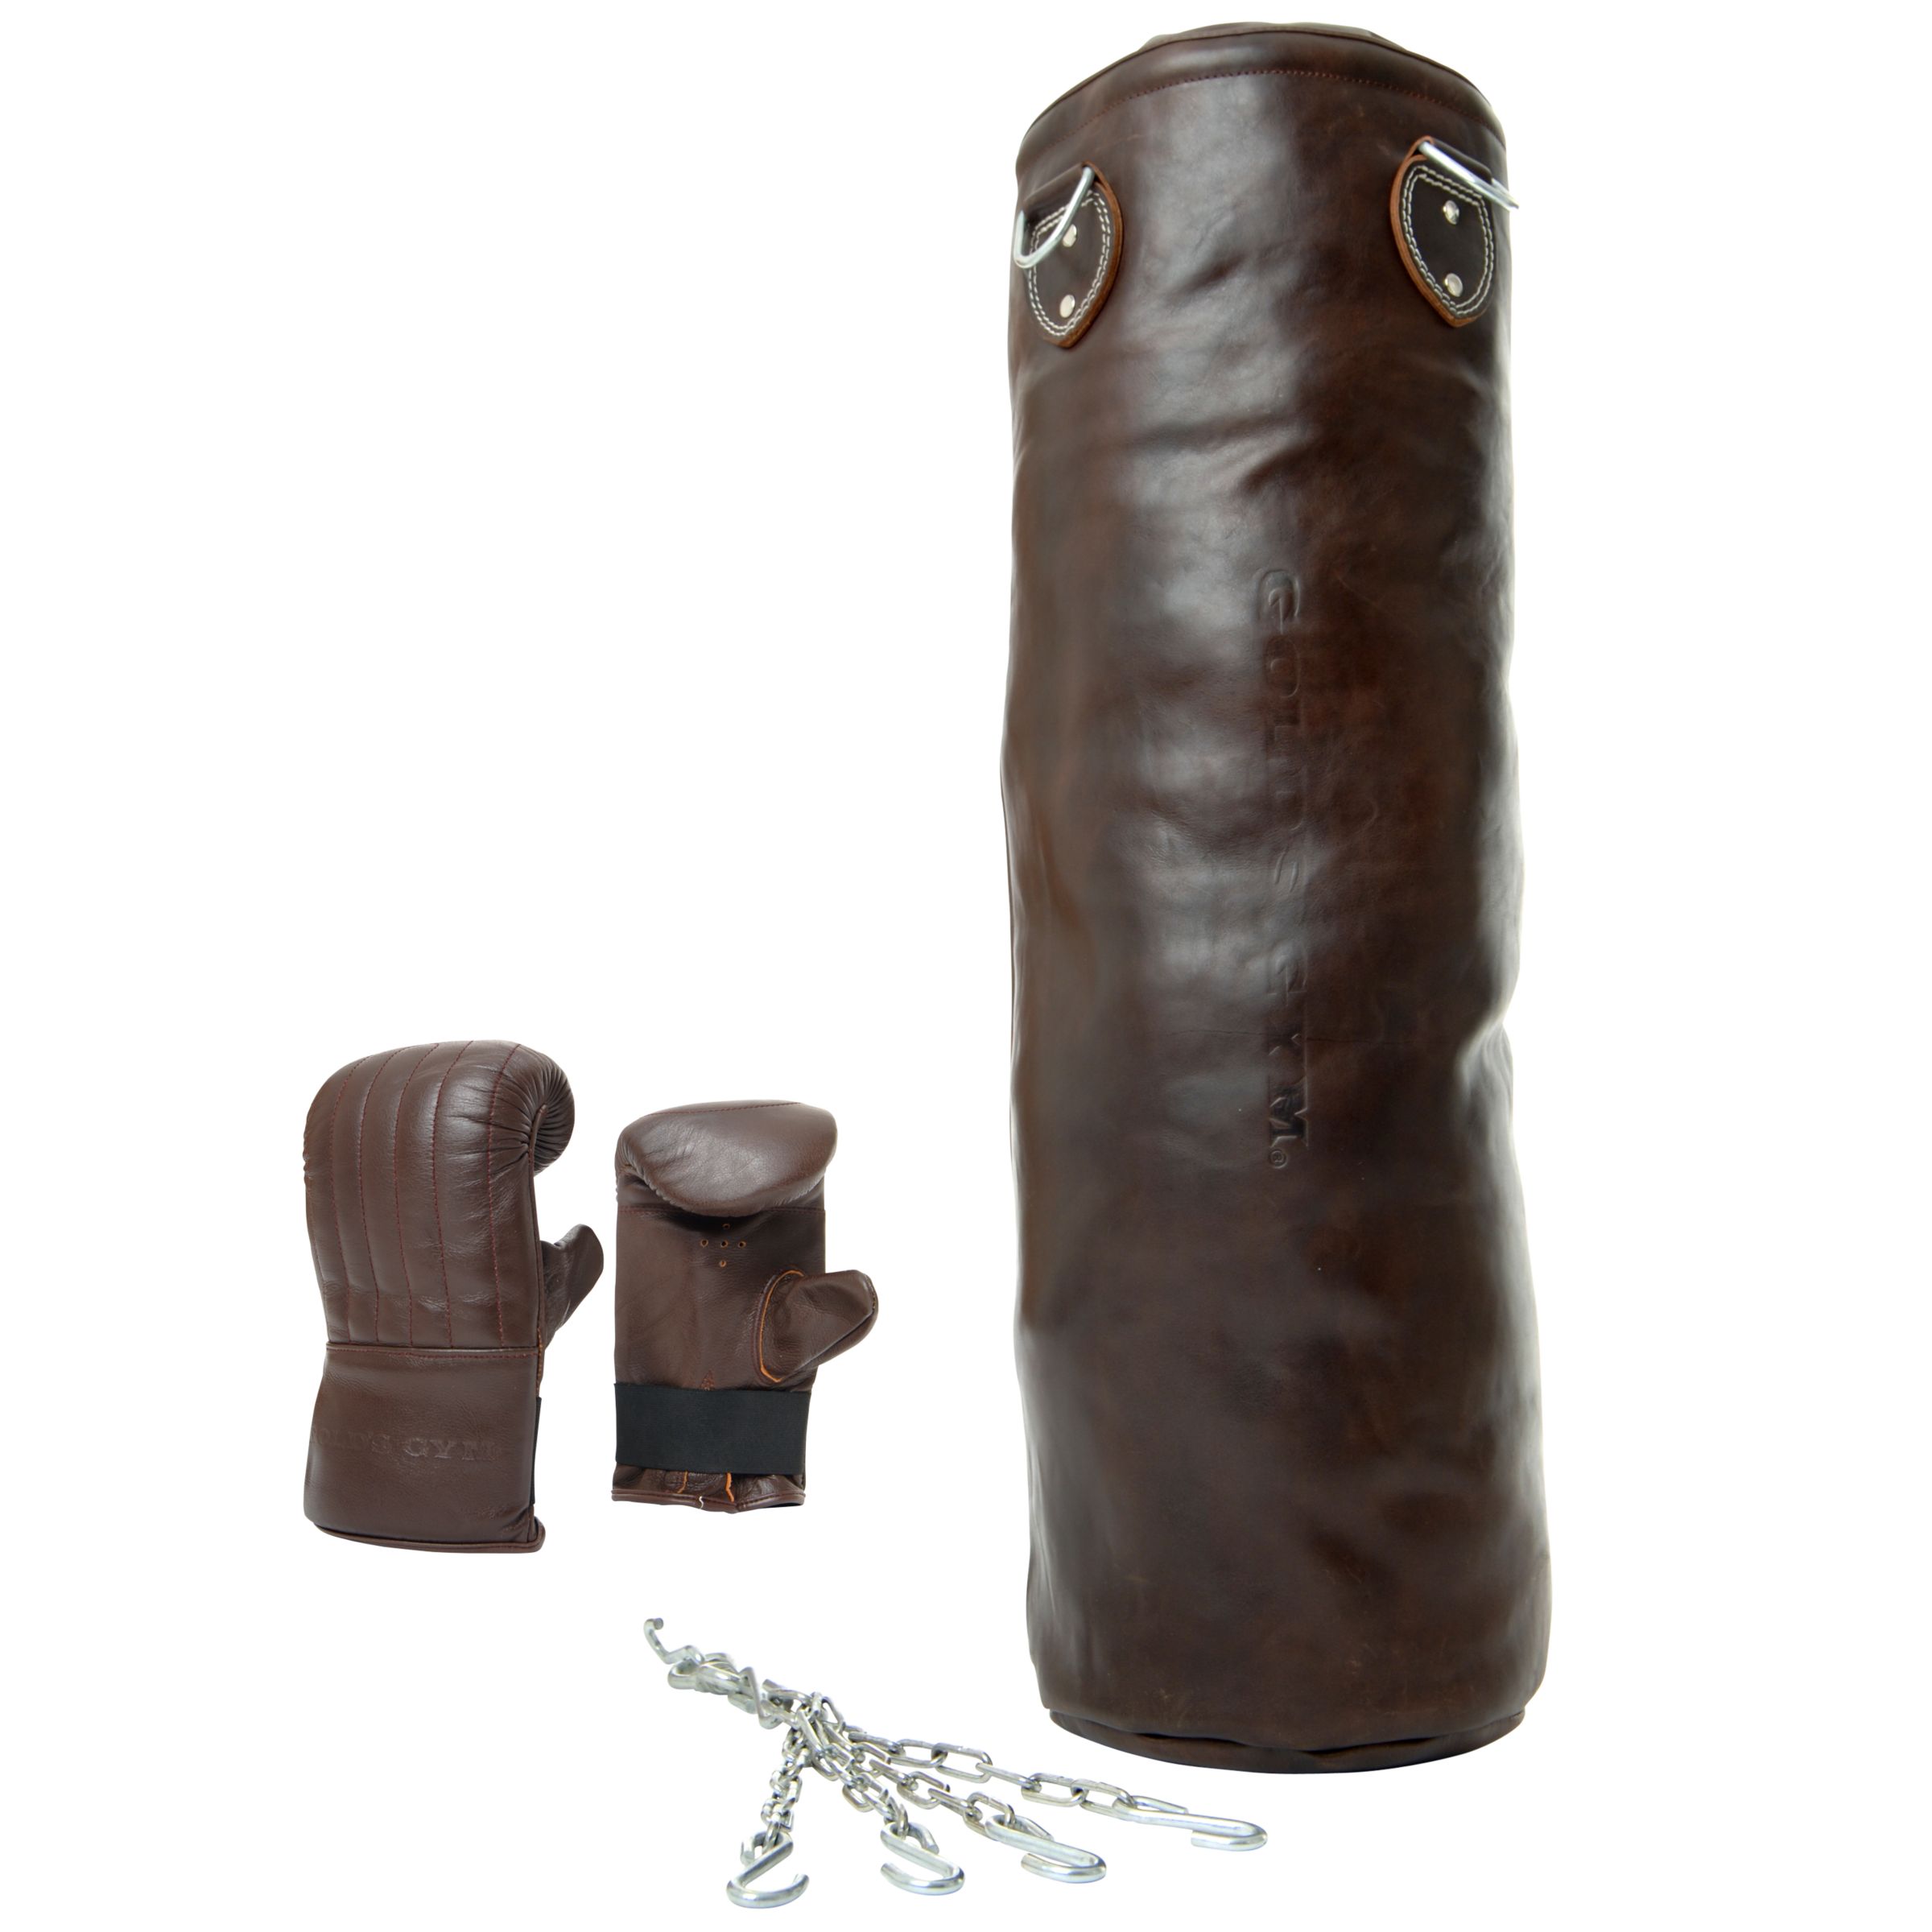 Heritage Punch Bag, Hooks, Chain